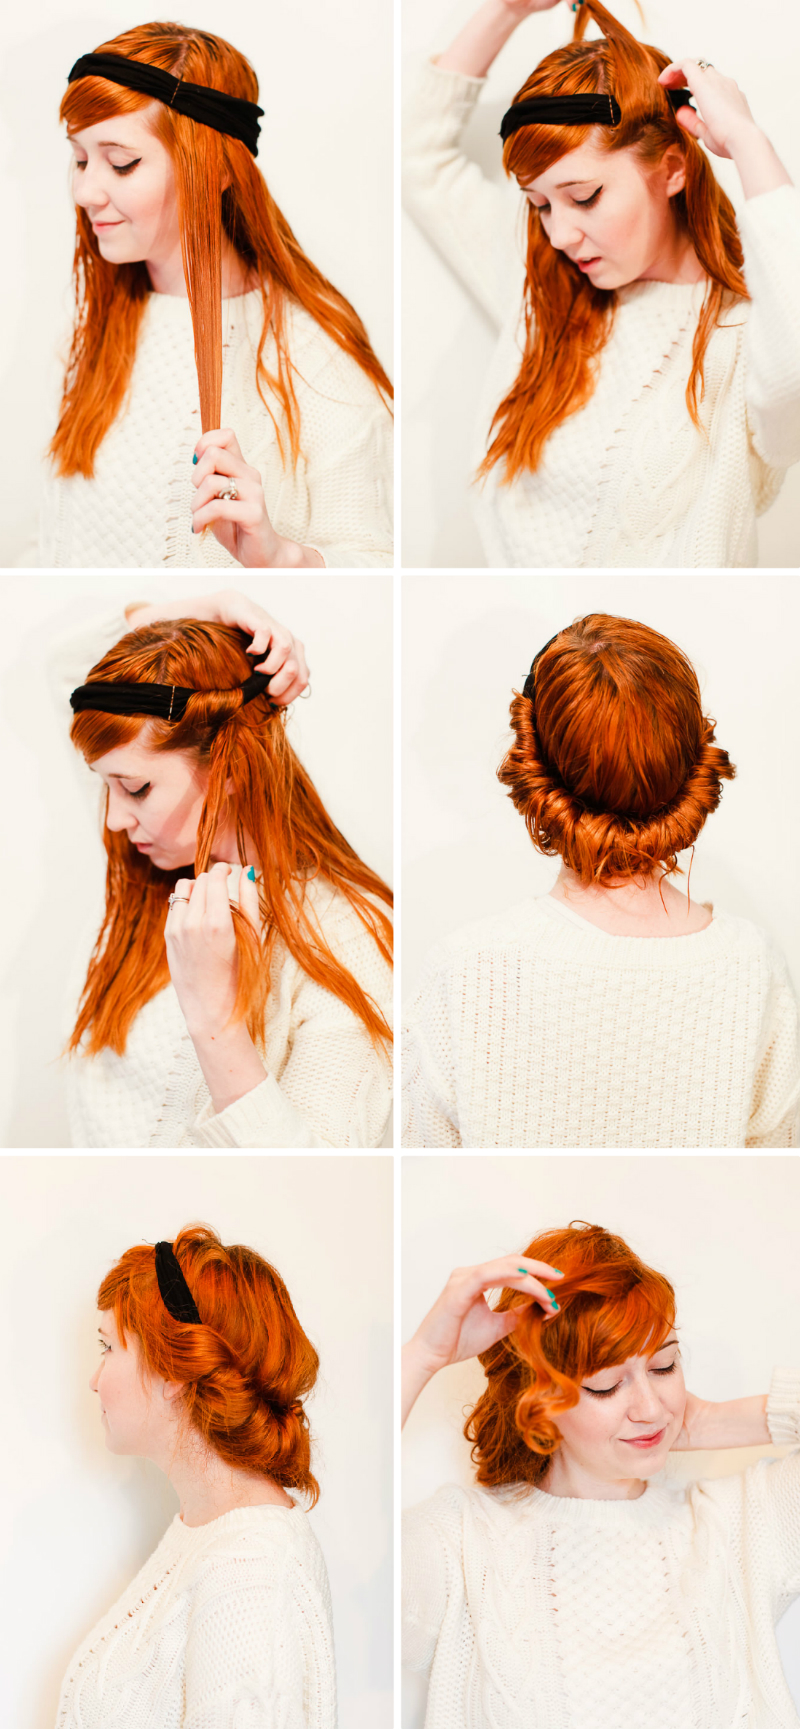 How To Create Sock Curls + More Heatless Styles That Add Volume to Fine ...